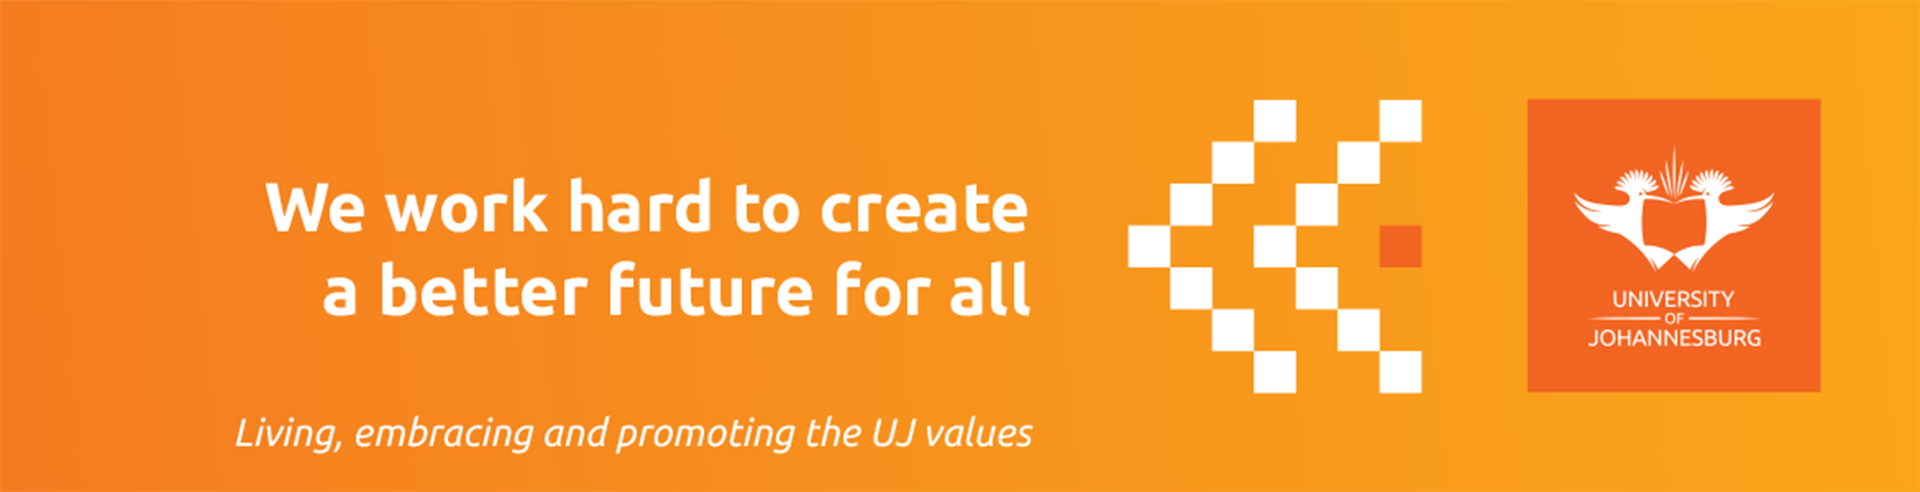 Uj Values Expressions Posters 2020 Ulink 1170x300mm 10